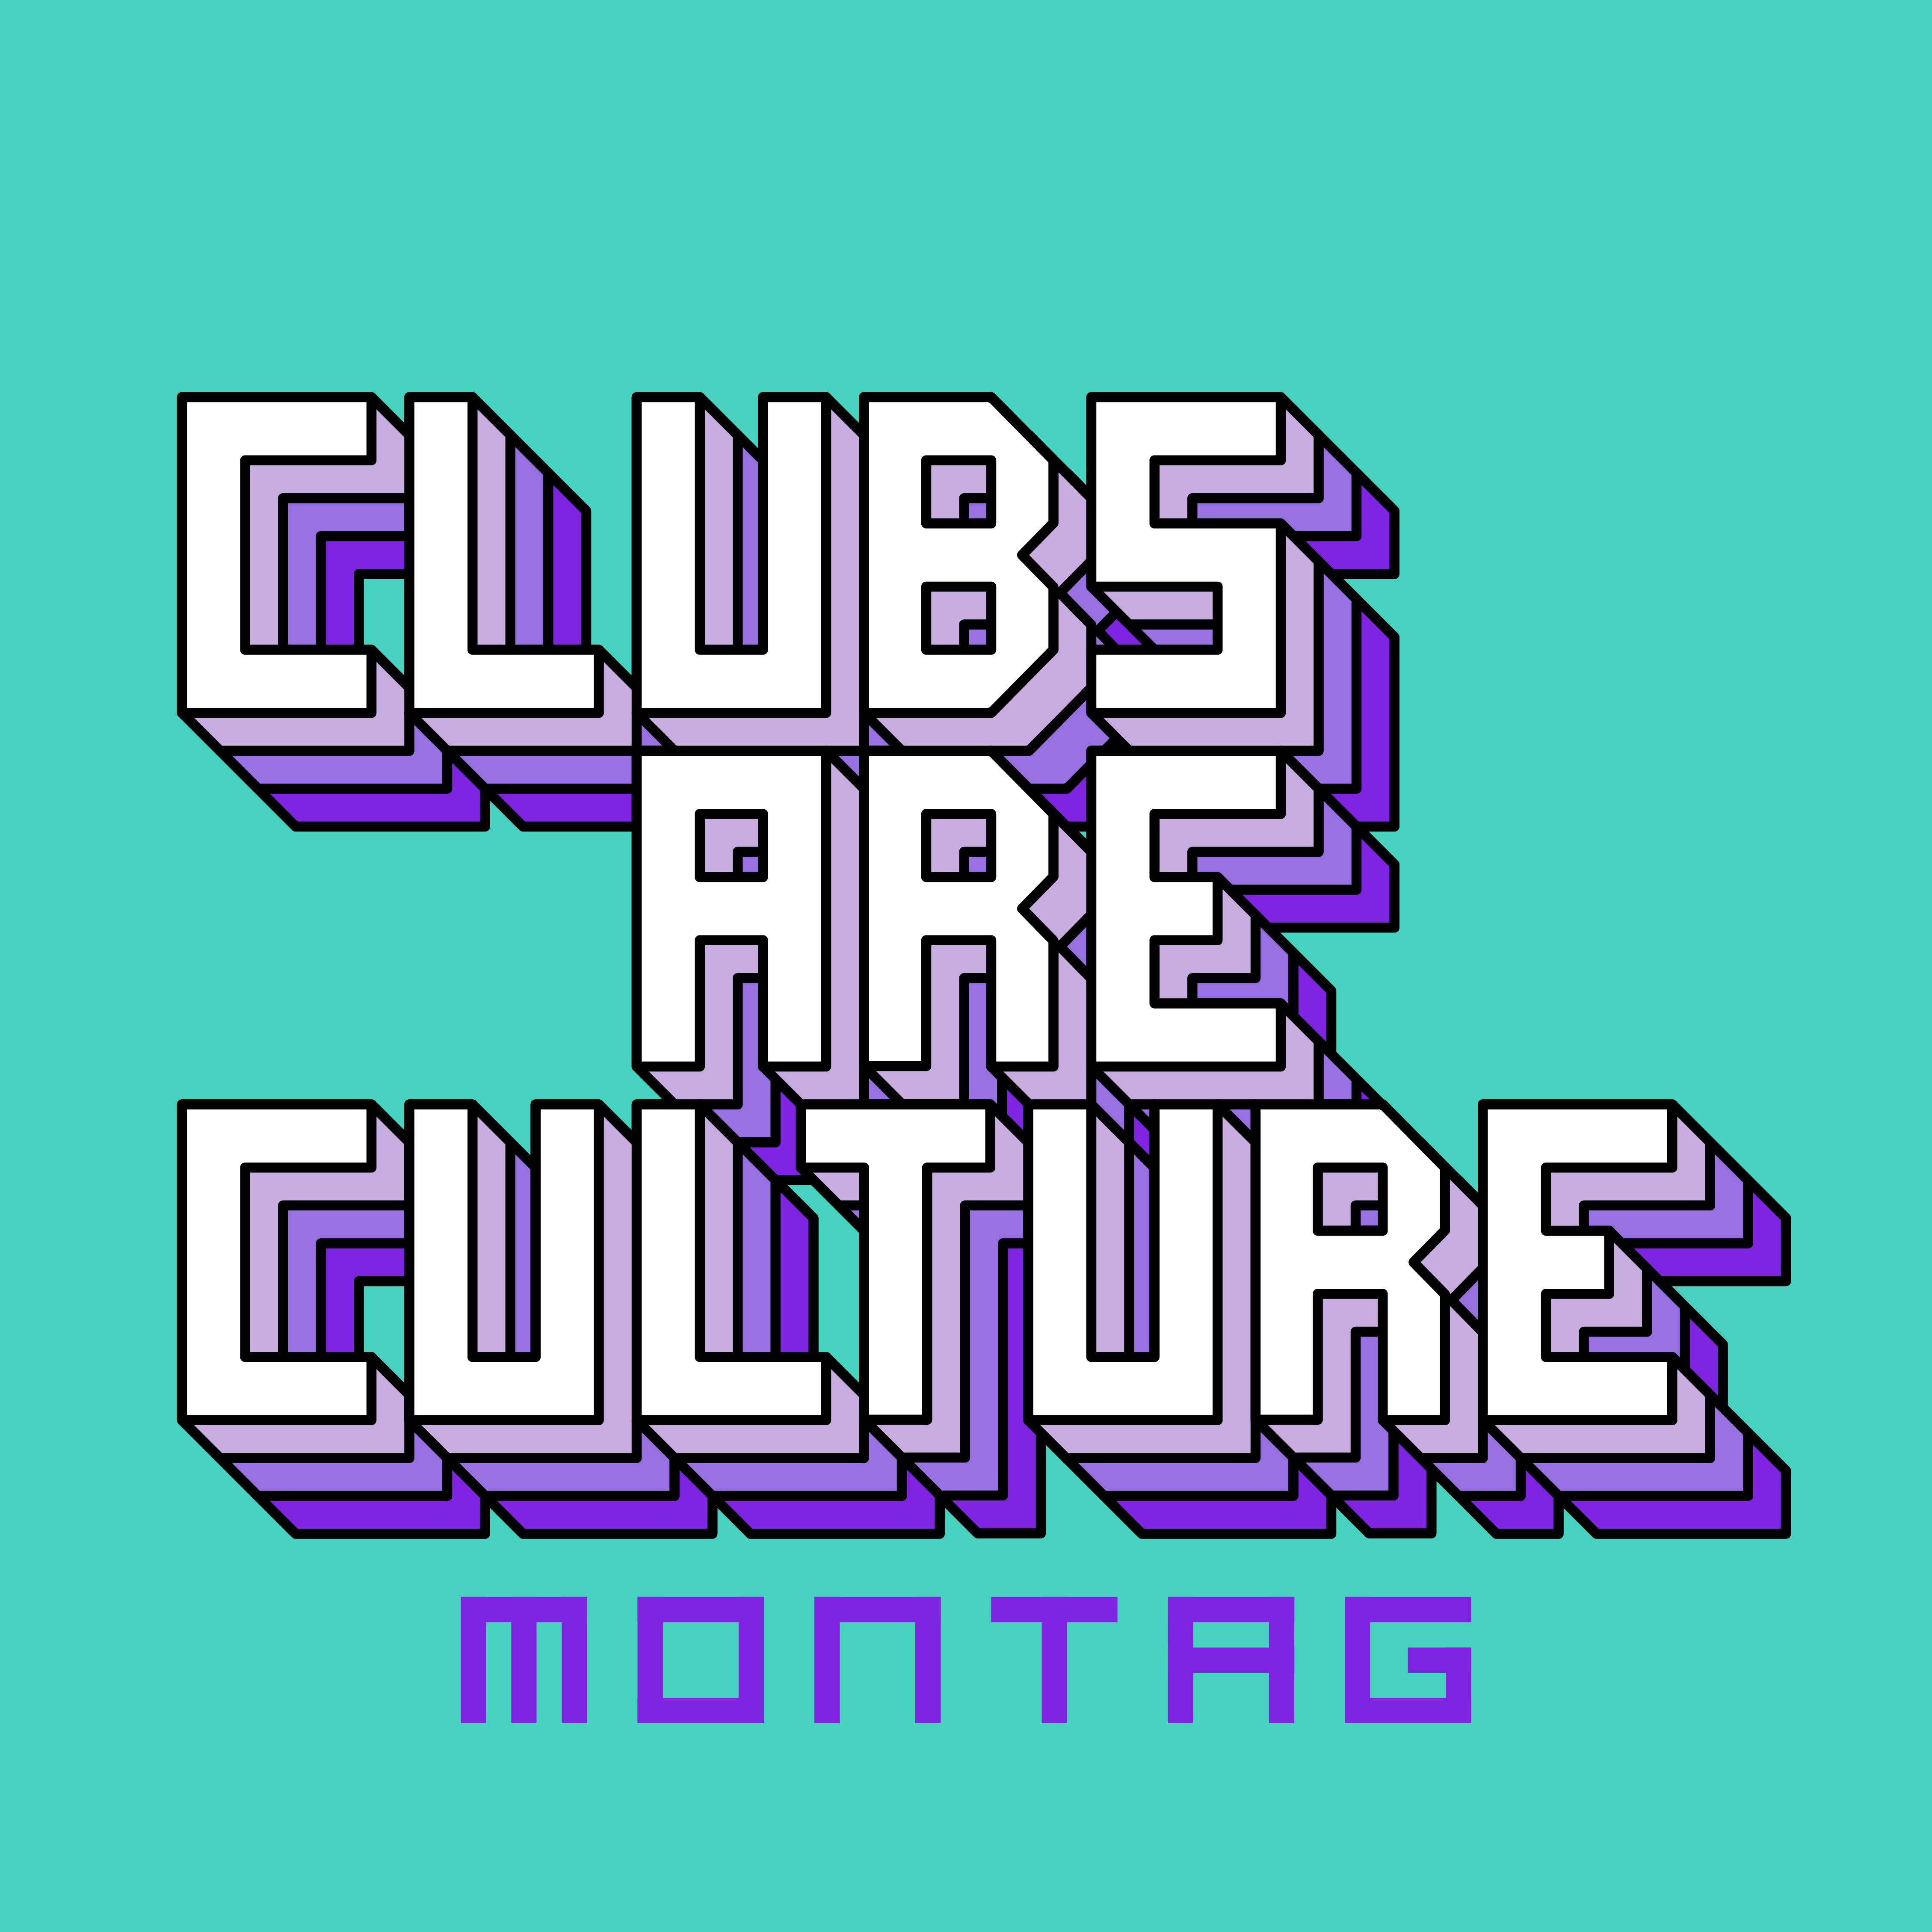 CLUBS ARE CULTURE - ABSCHLUSSKUNDGEBUNG - Página frontal